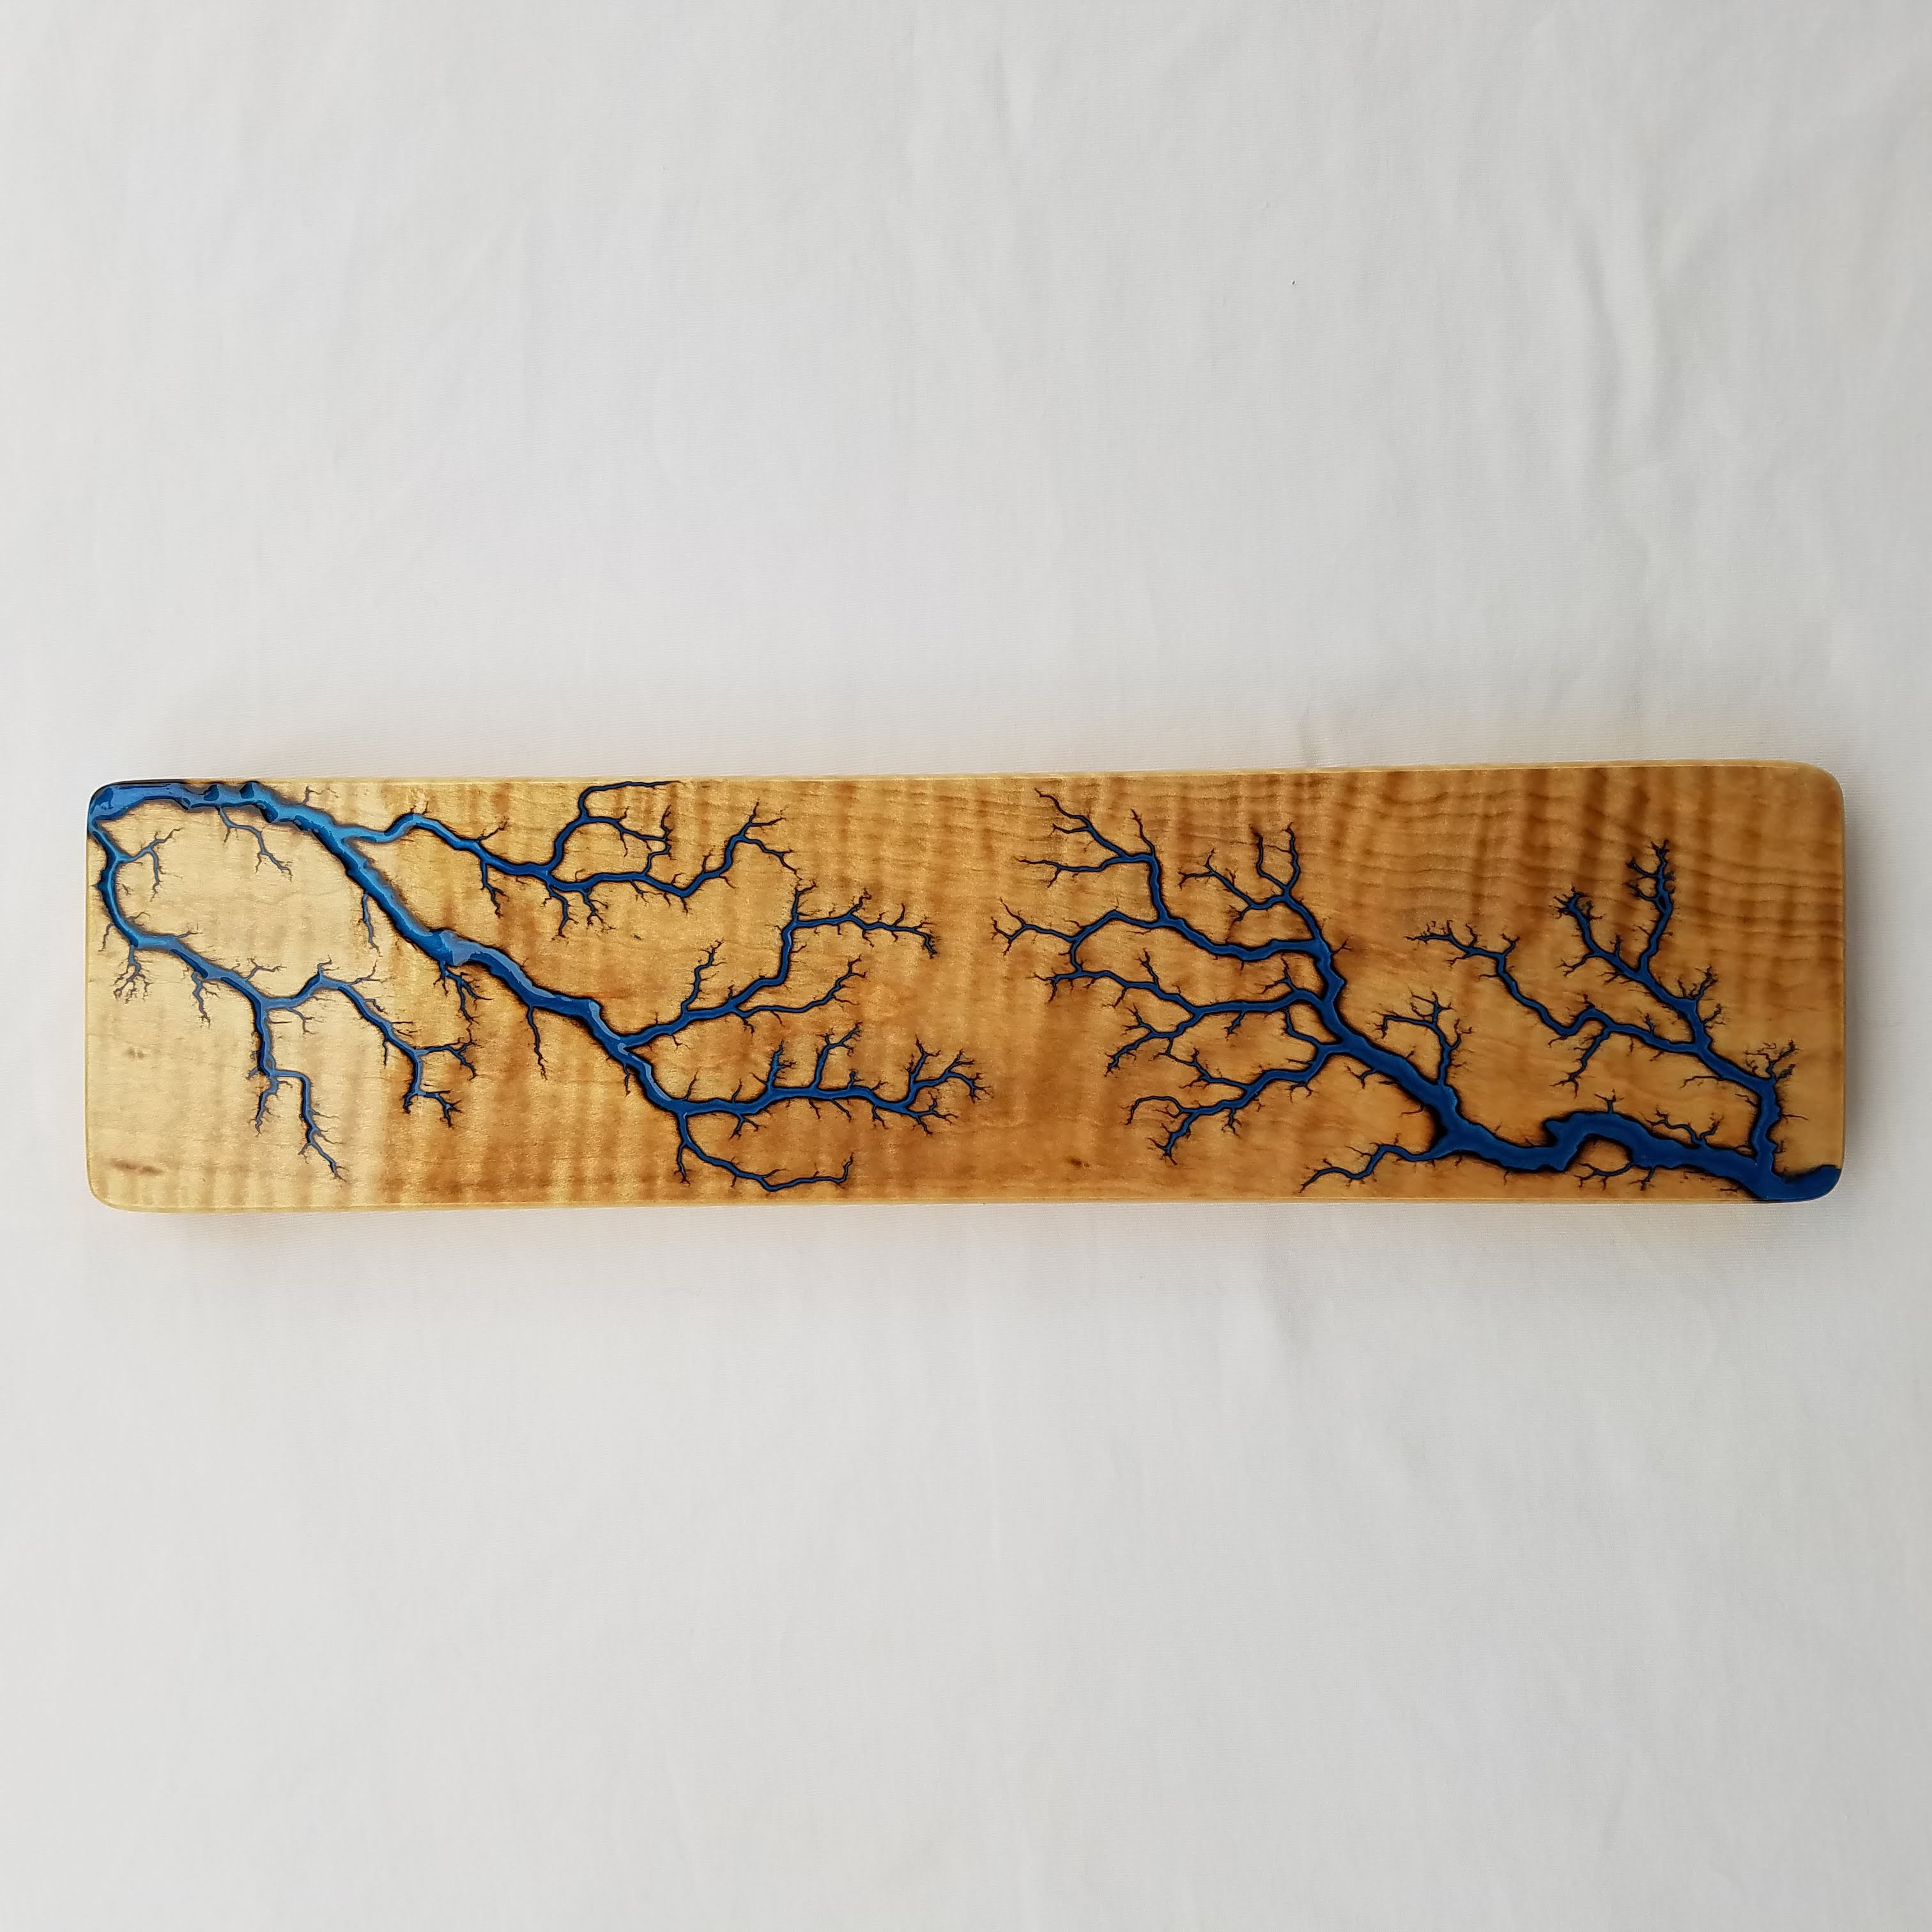 CURLY MAPLE Wrist Rest (Made-to-order)